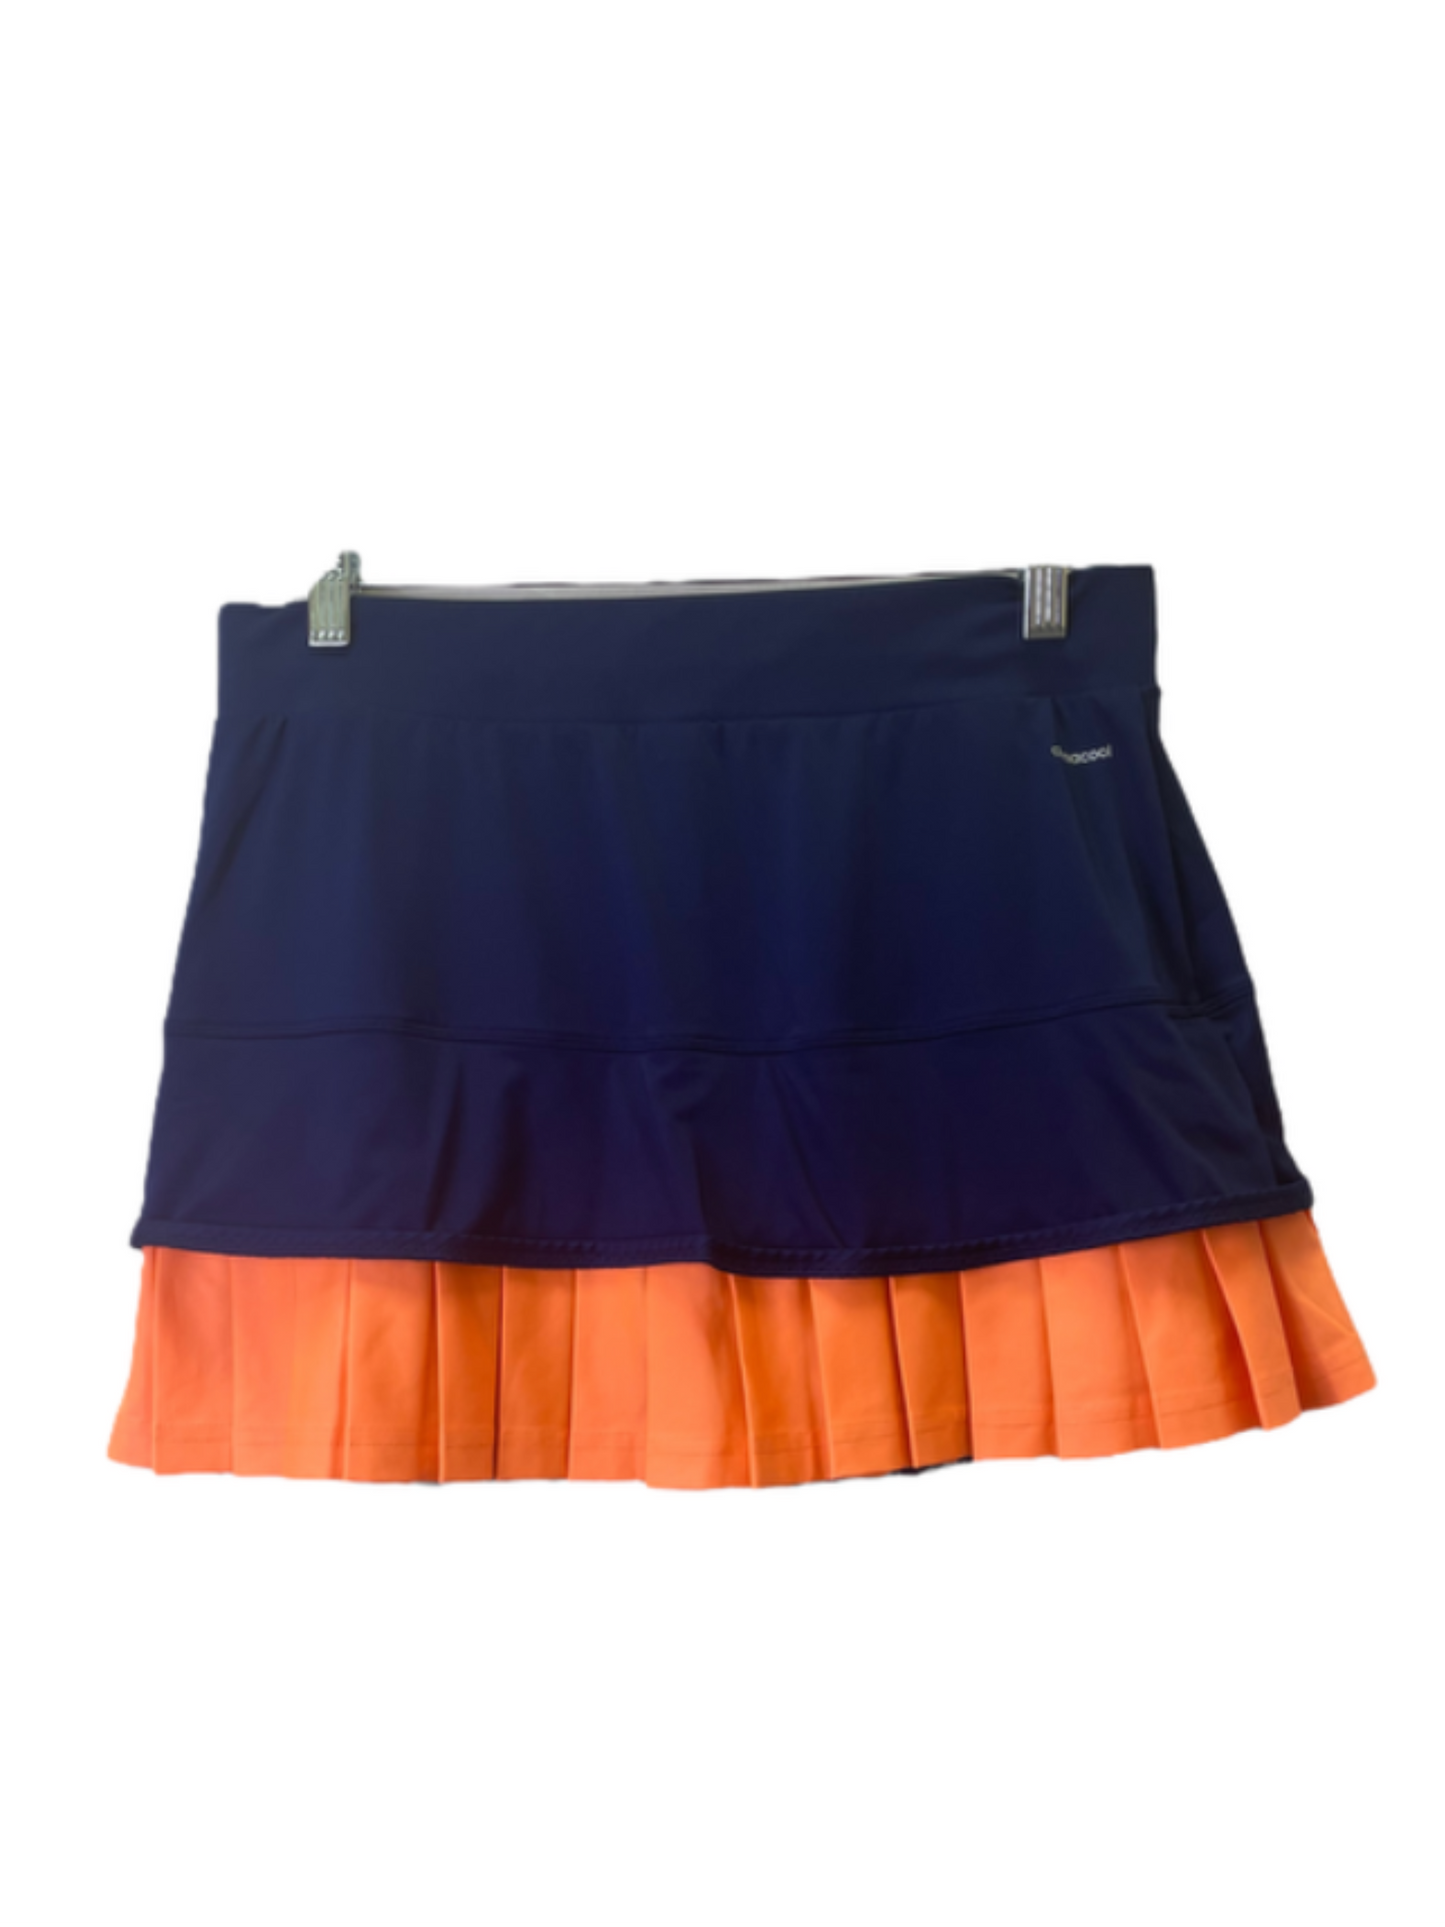 Athletic Shorts 2 Pc By Adidas  Size: S